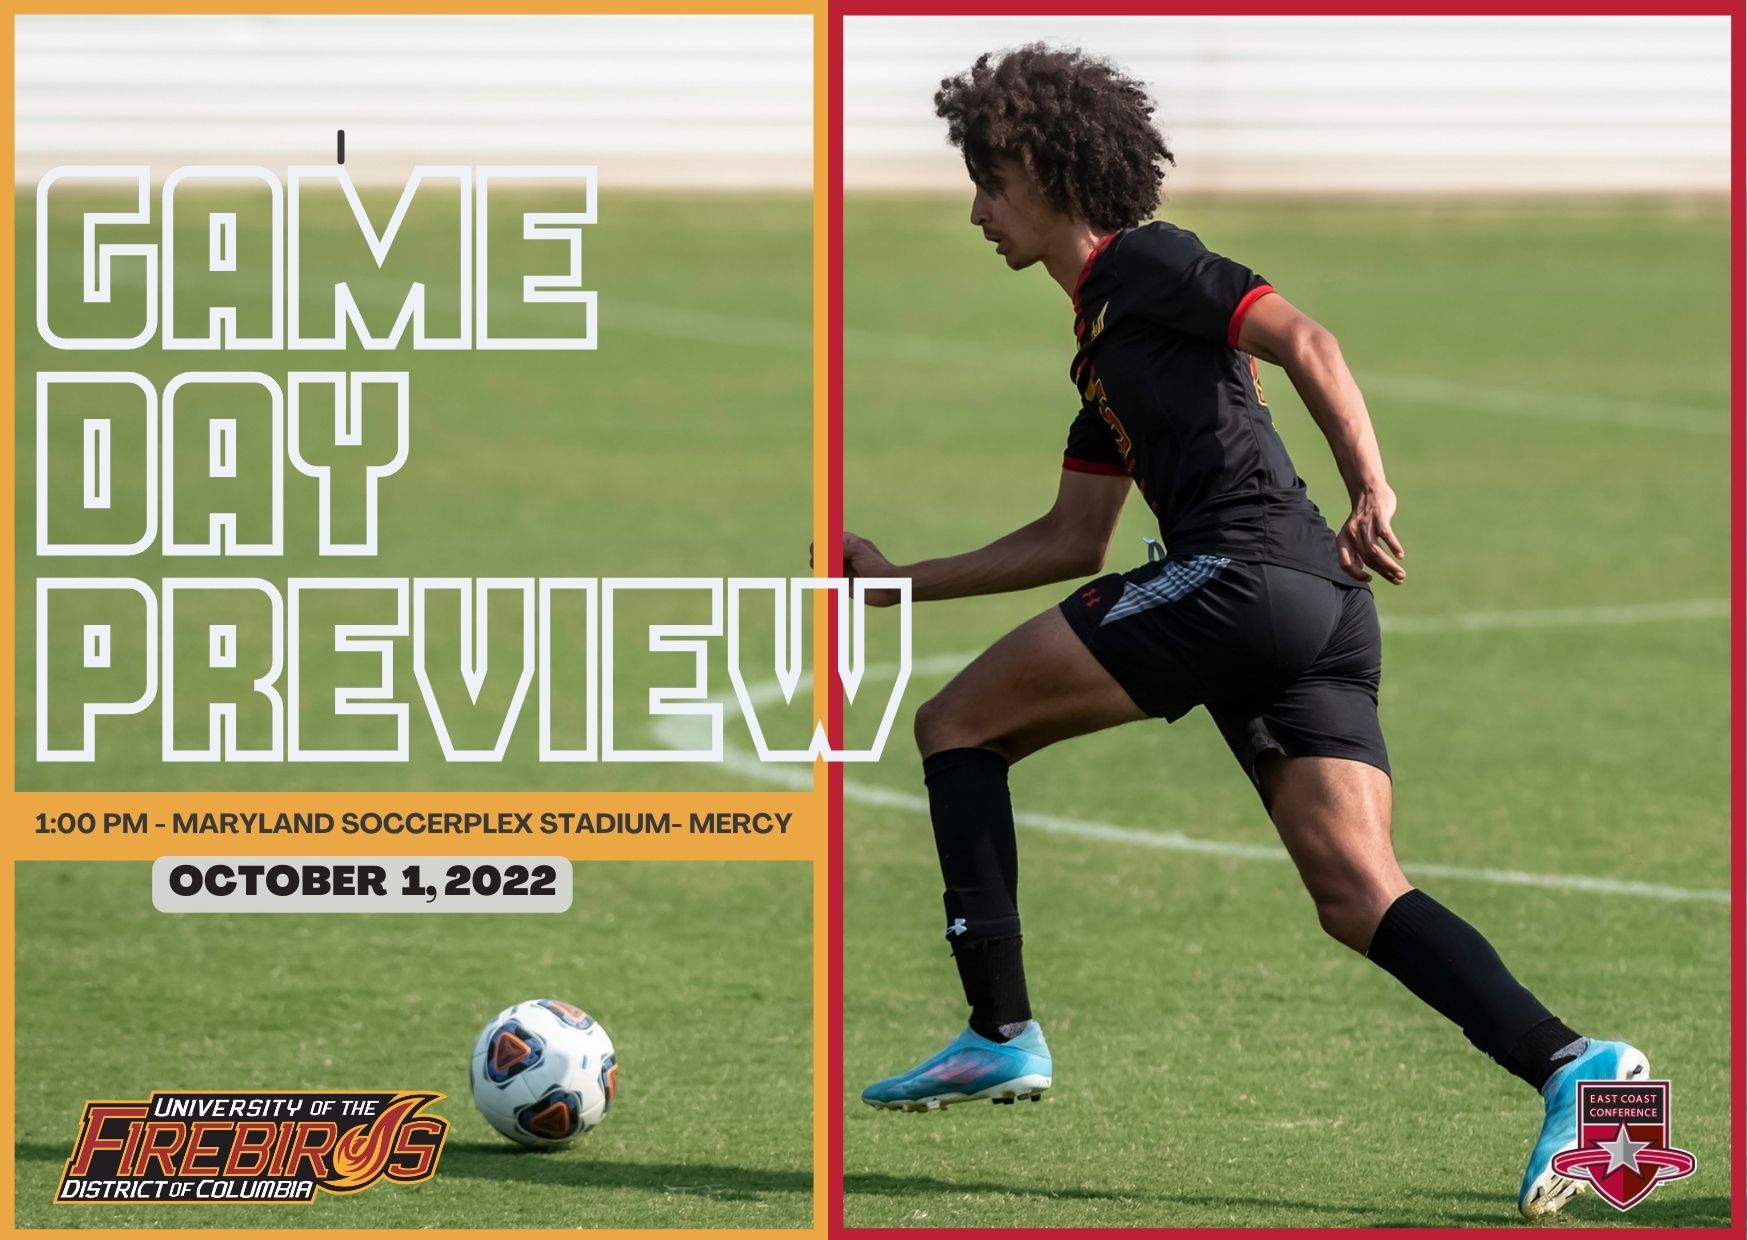  MEN'S SOCCER: GAME DAY PREVIEW 10/1